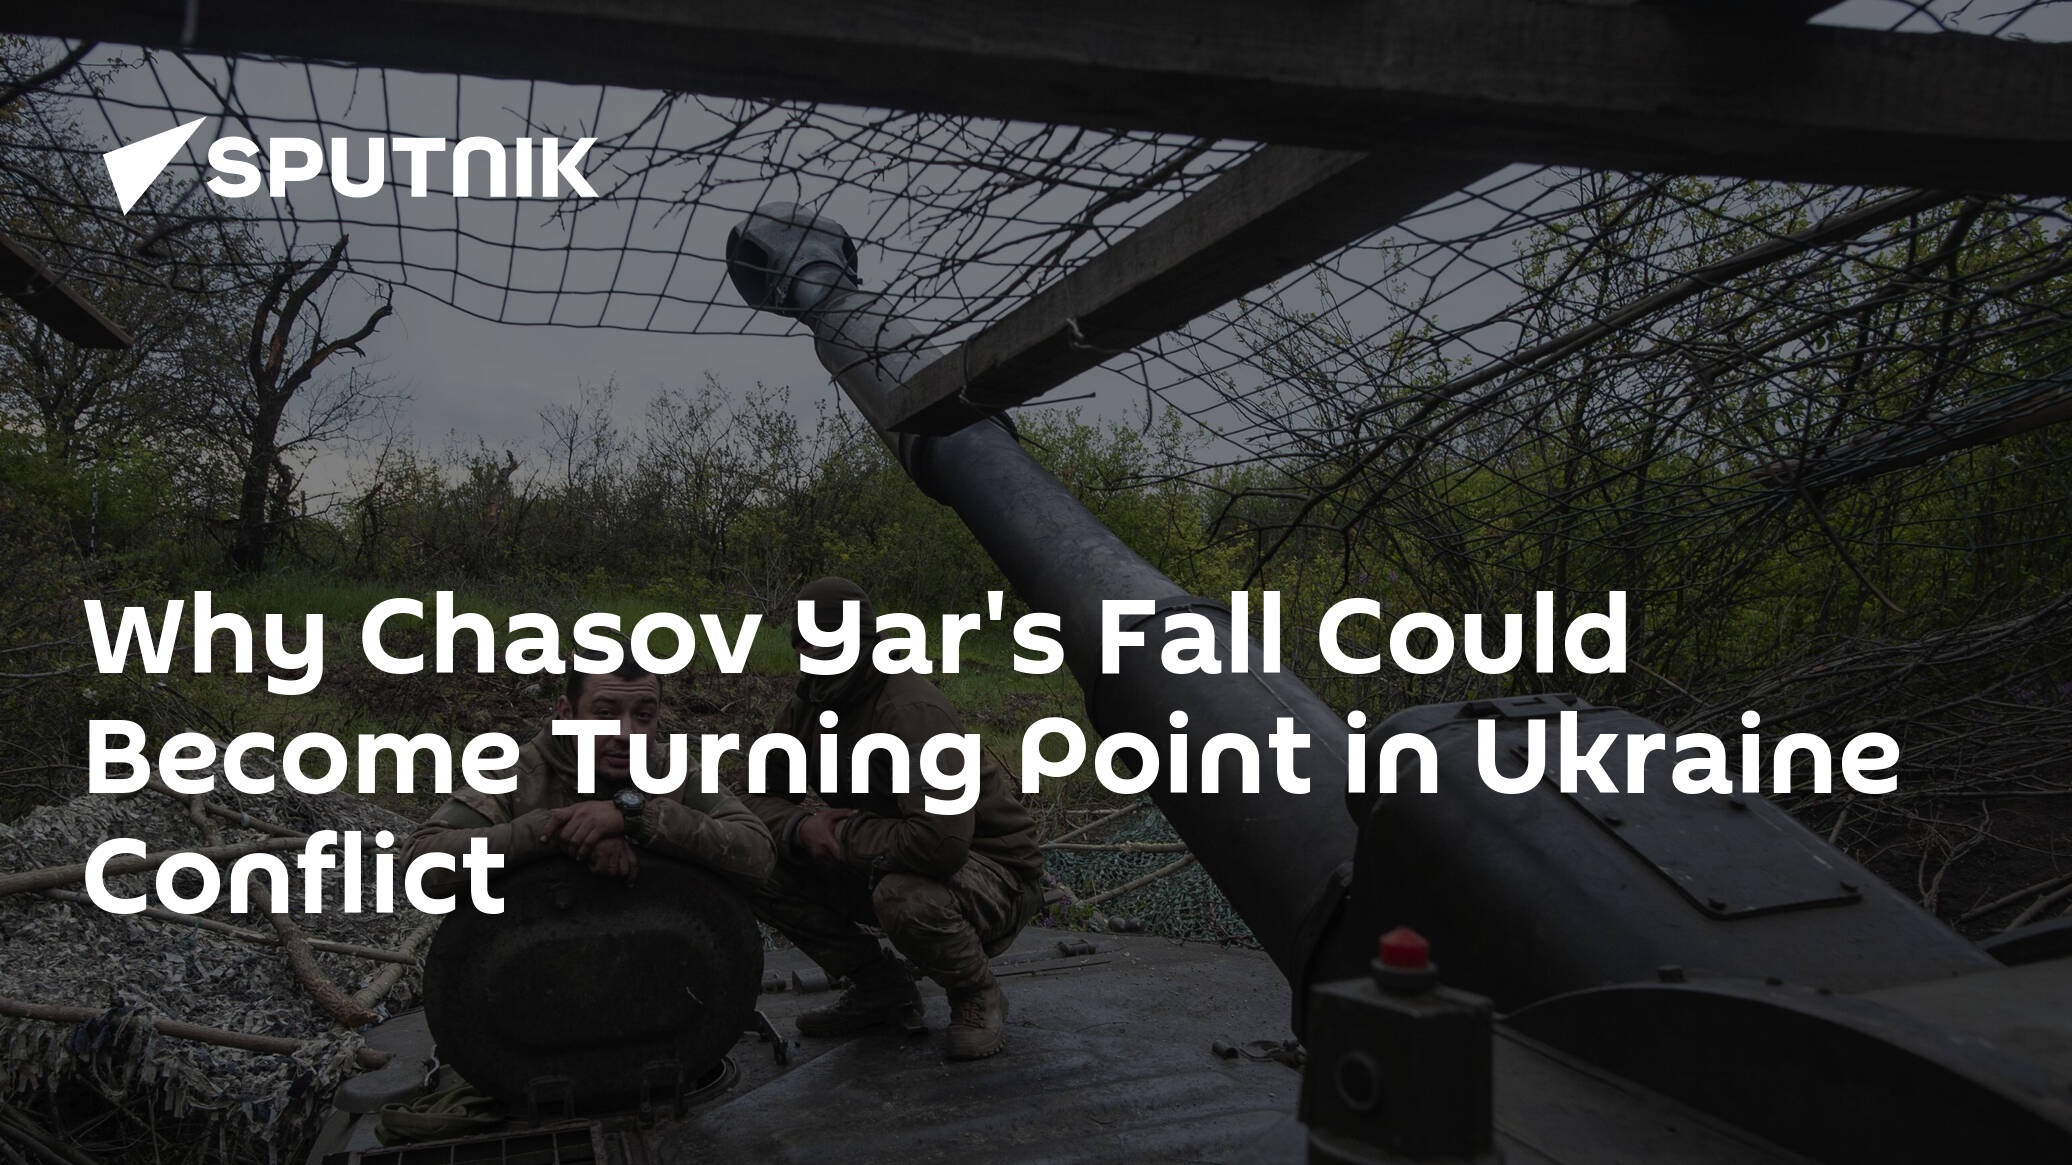 Why Chasov Yar's Fall Could Become Turning Point in Ukraine Conflict